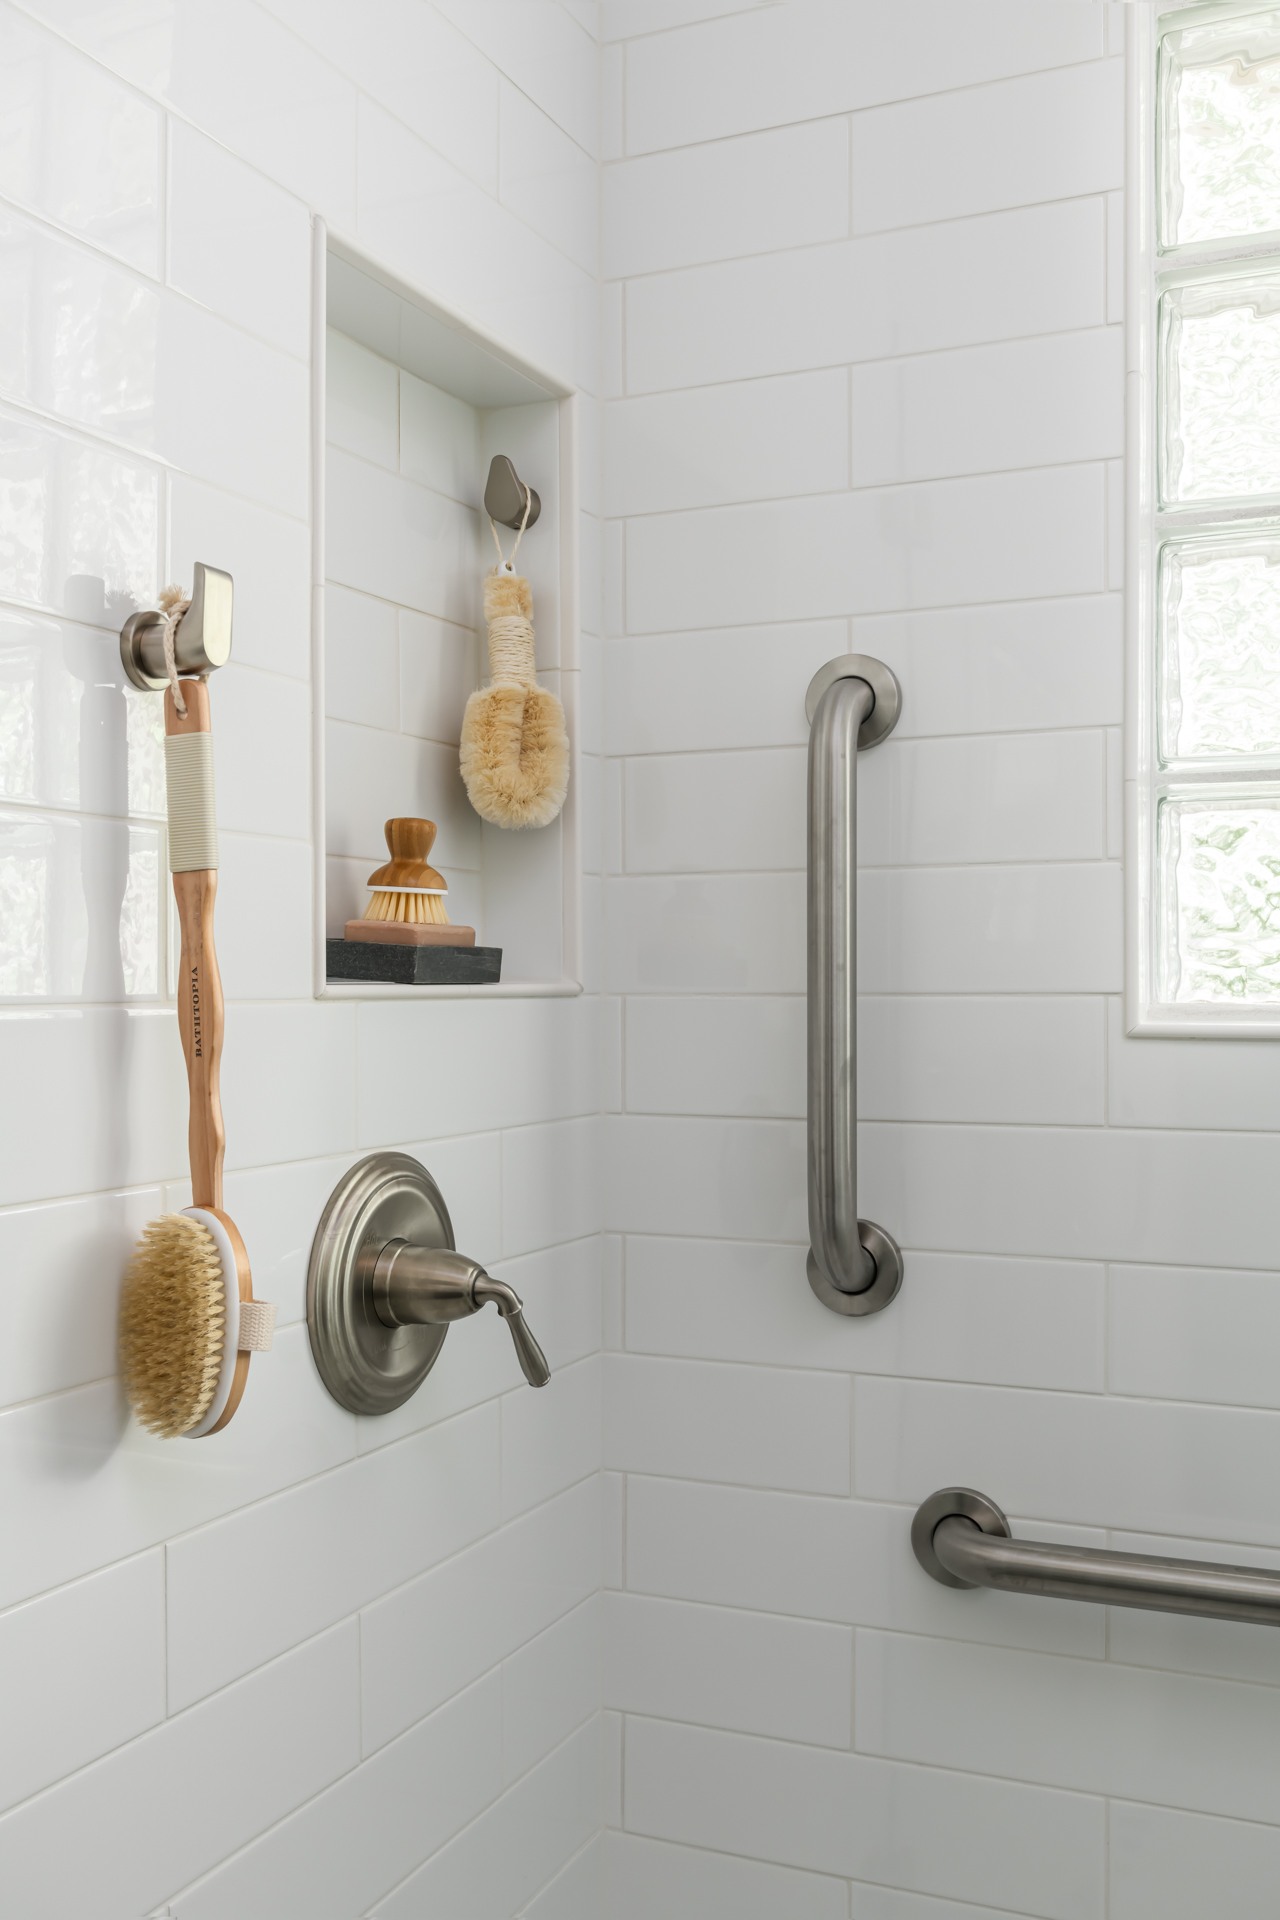 aging in place bathroom renovation shower grab bars, niche